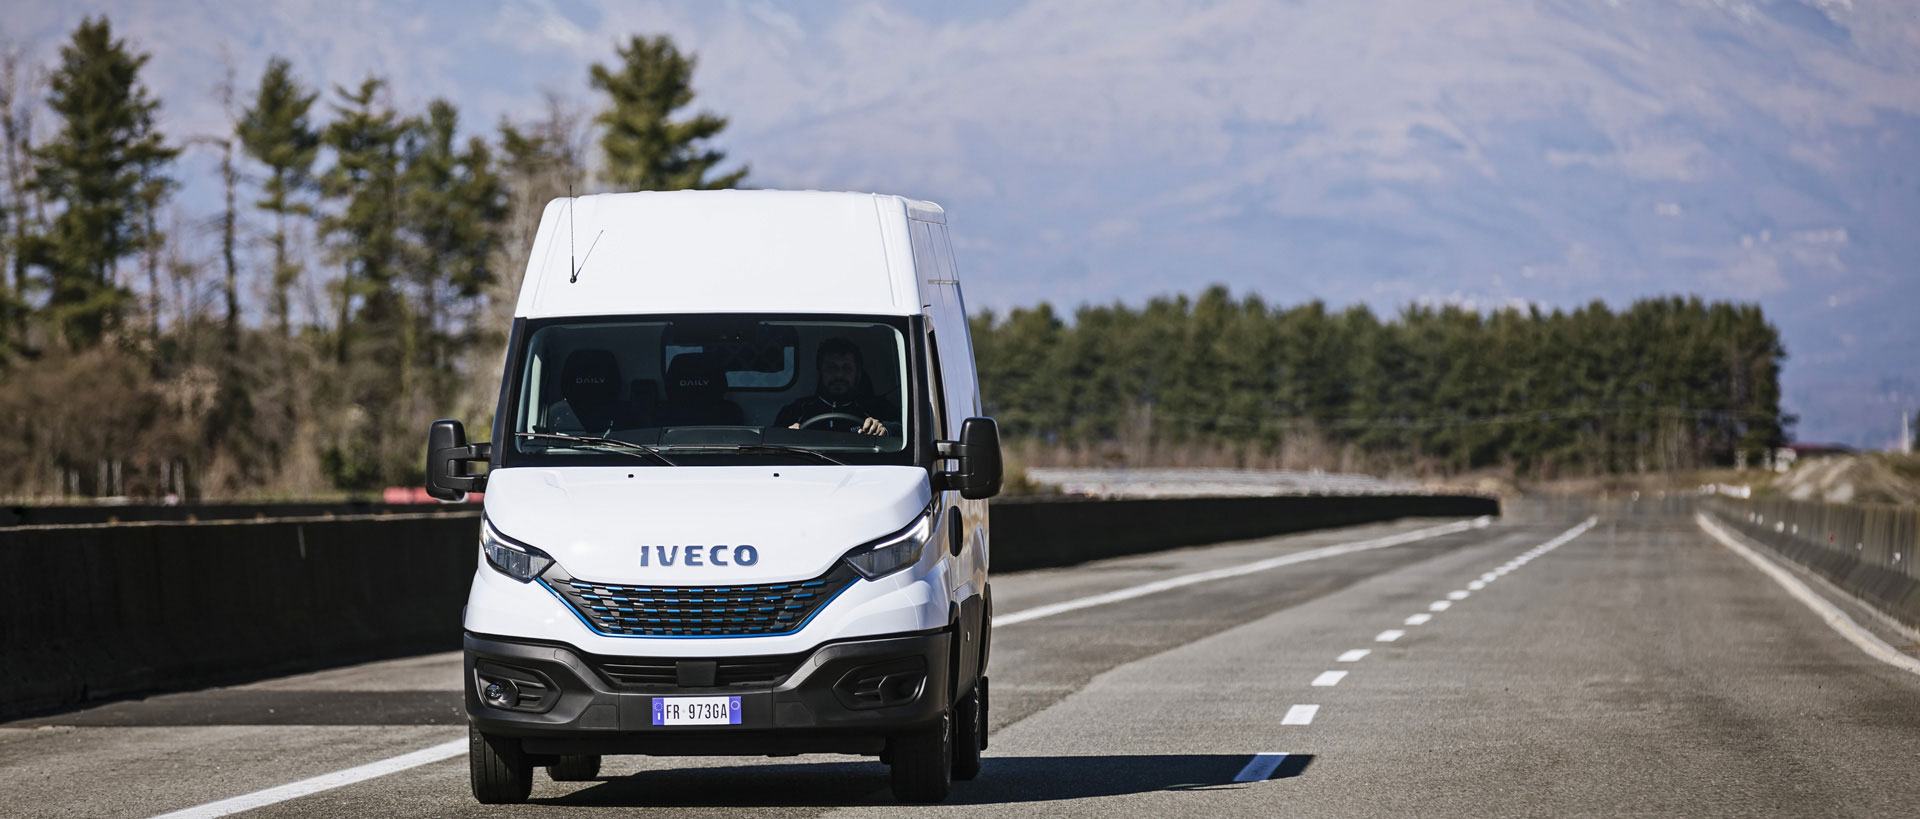 Photo of a white Iveco van on the Iveco Track